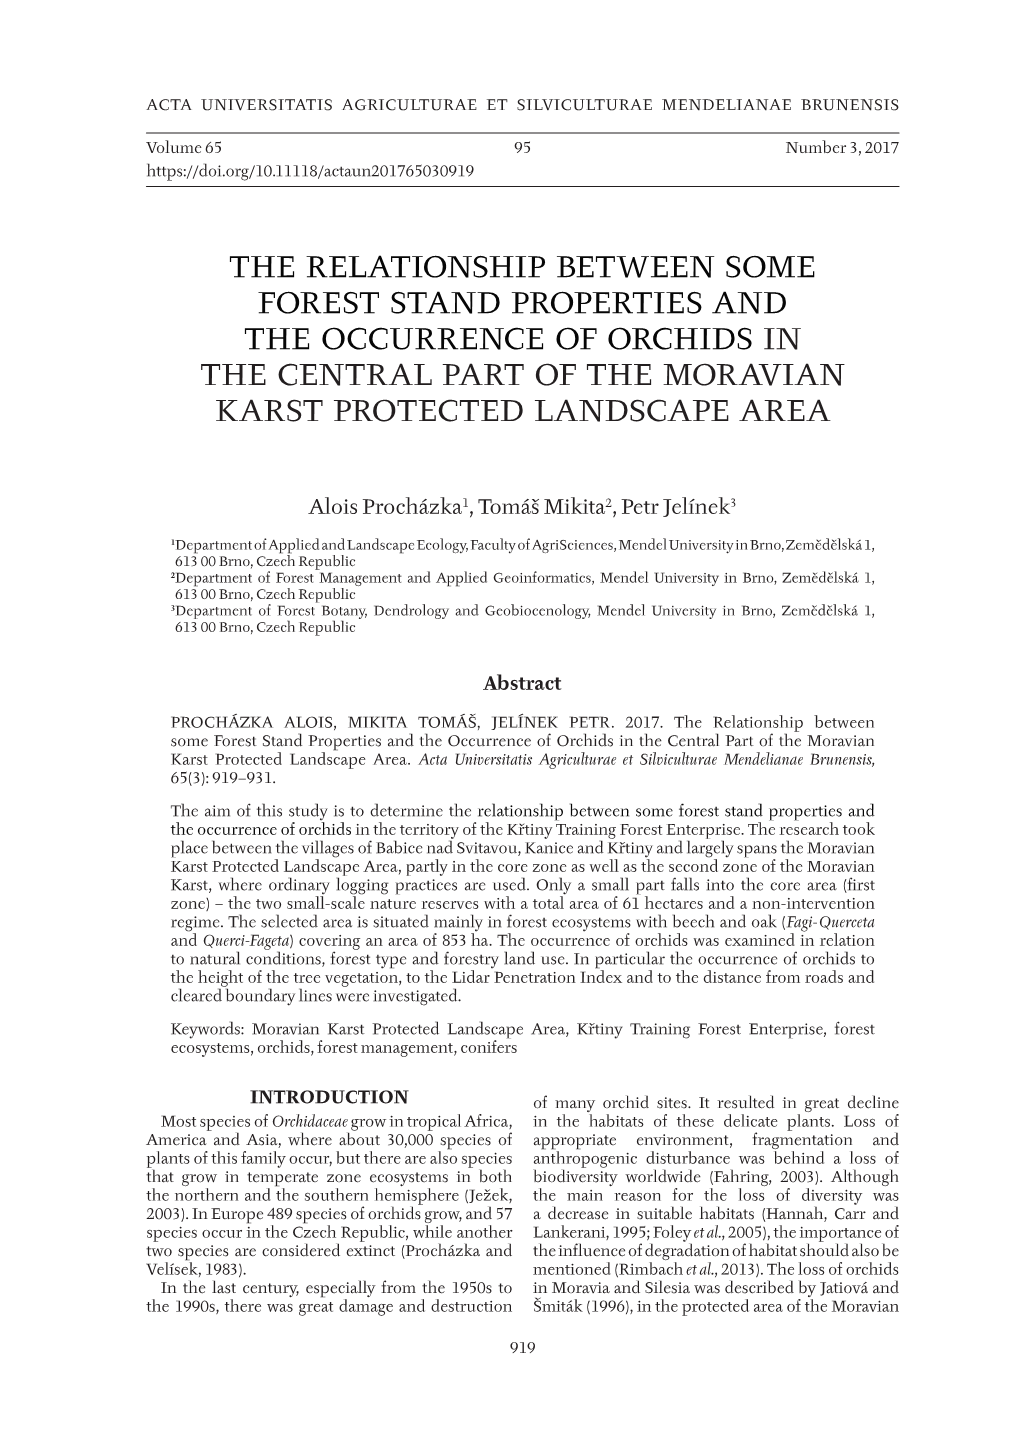 The Relationship Between Some Forest Stand Properties and the Occurrence of Orchids in the Central Part of the Moravian Karst Protected Landscape Area